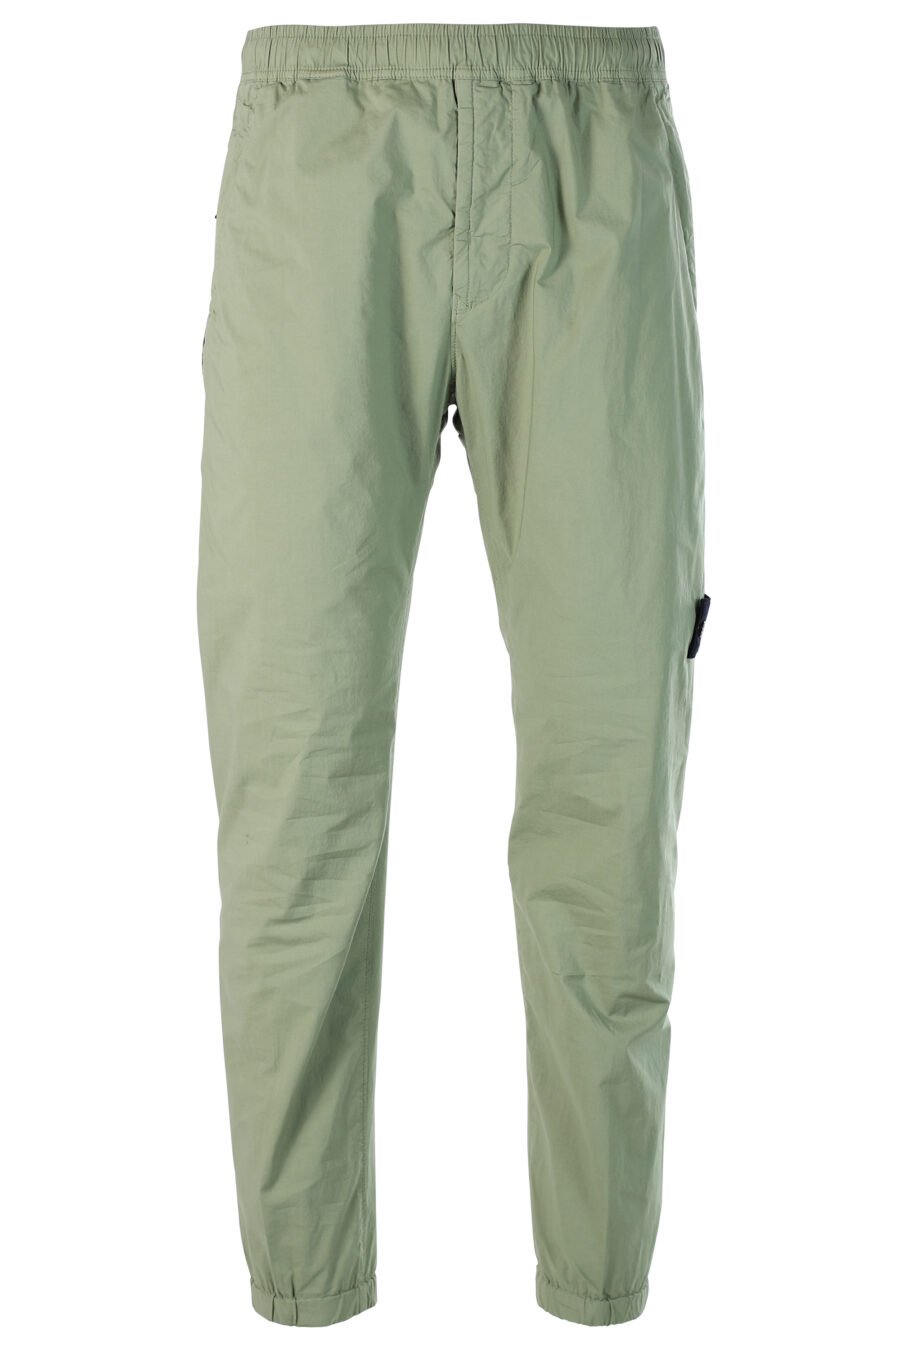 Military green cargo style trousers with patch - 8052572549175